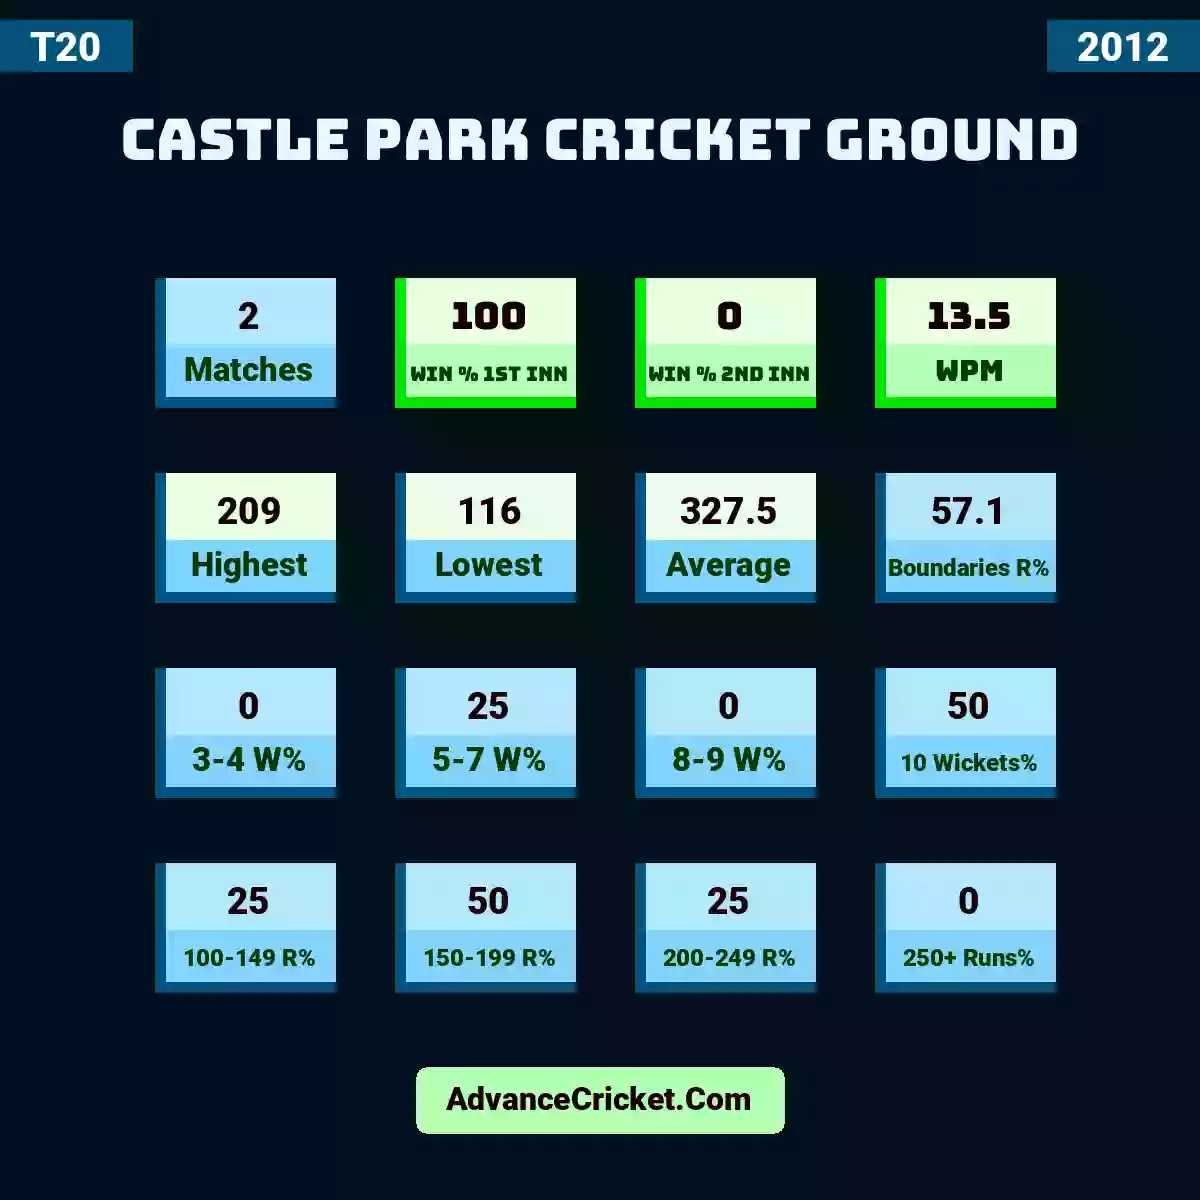 Image showing Castle Park Cricket Ground with Matches: 2, Win % 1st Inn: 100, Win % 2nd Inn: 0, WPM: 13.5, Highest: 209, Lowest: 116, Average: 327.5, Boundaries R%: 57.1, 3-4 W%: 0, 5-7 W%: 25, 8-9 W%: 0, 10 Wickets%: 50, 100-149 R%: 25, 150-199 R%: 50, 200-249 R%: 25, 250+ Runs%: 0.